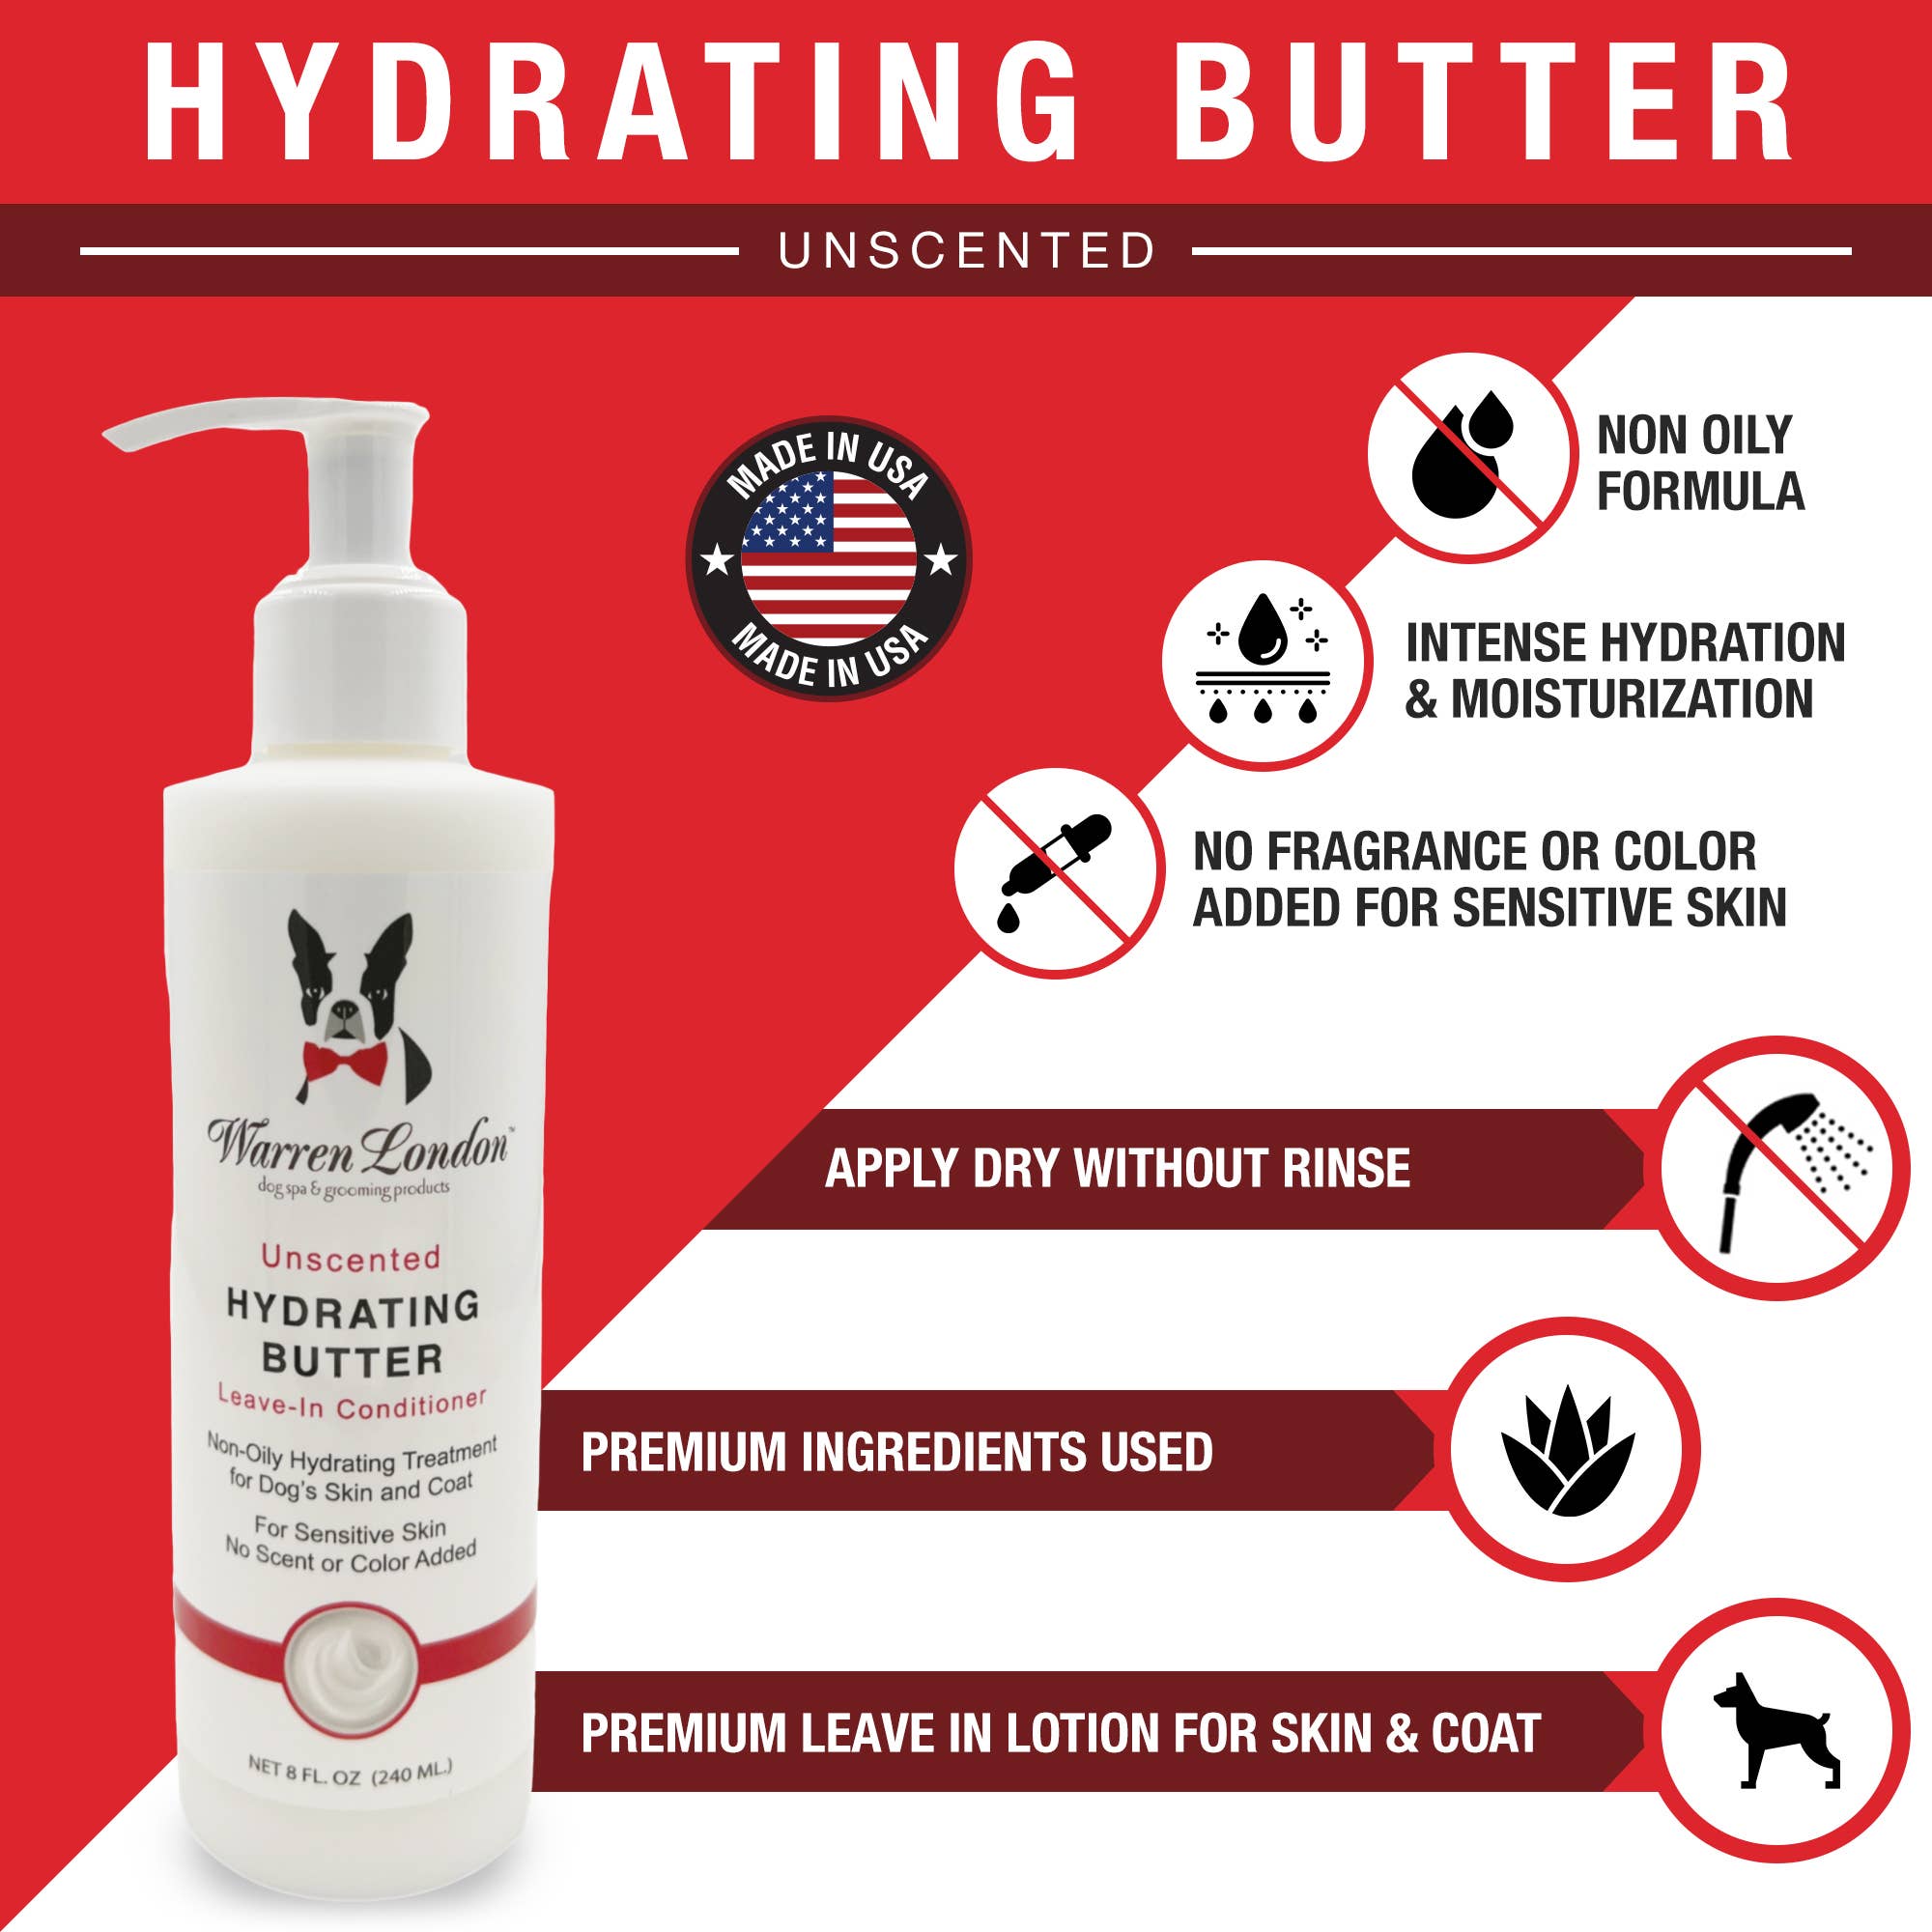 Warren London Dog Products - Hydrating Butter Leave-In Lotion - 3 Scents - 2 Sizes